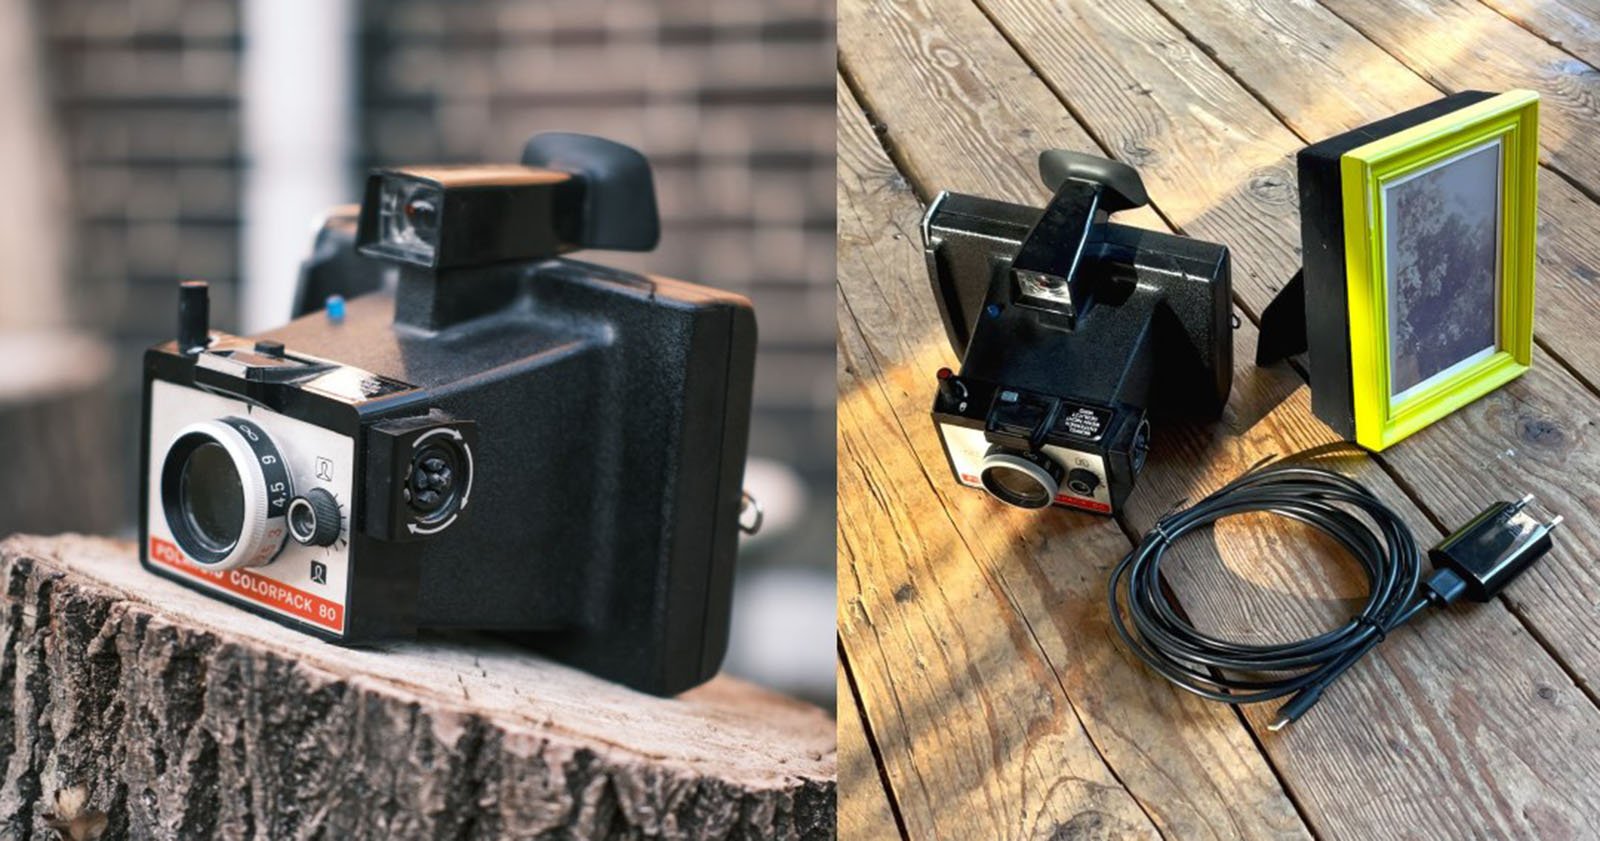  custom polaroid land camera delivers instant photos over 